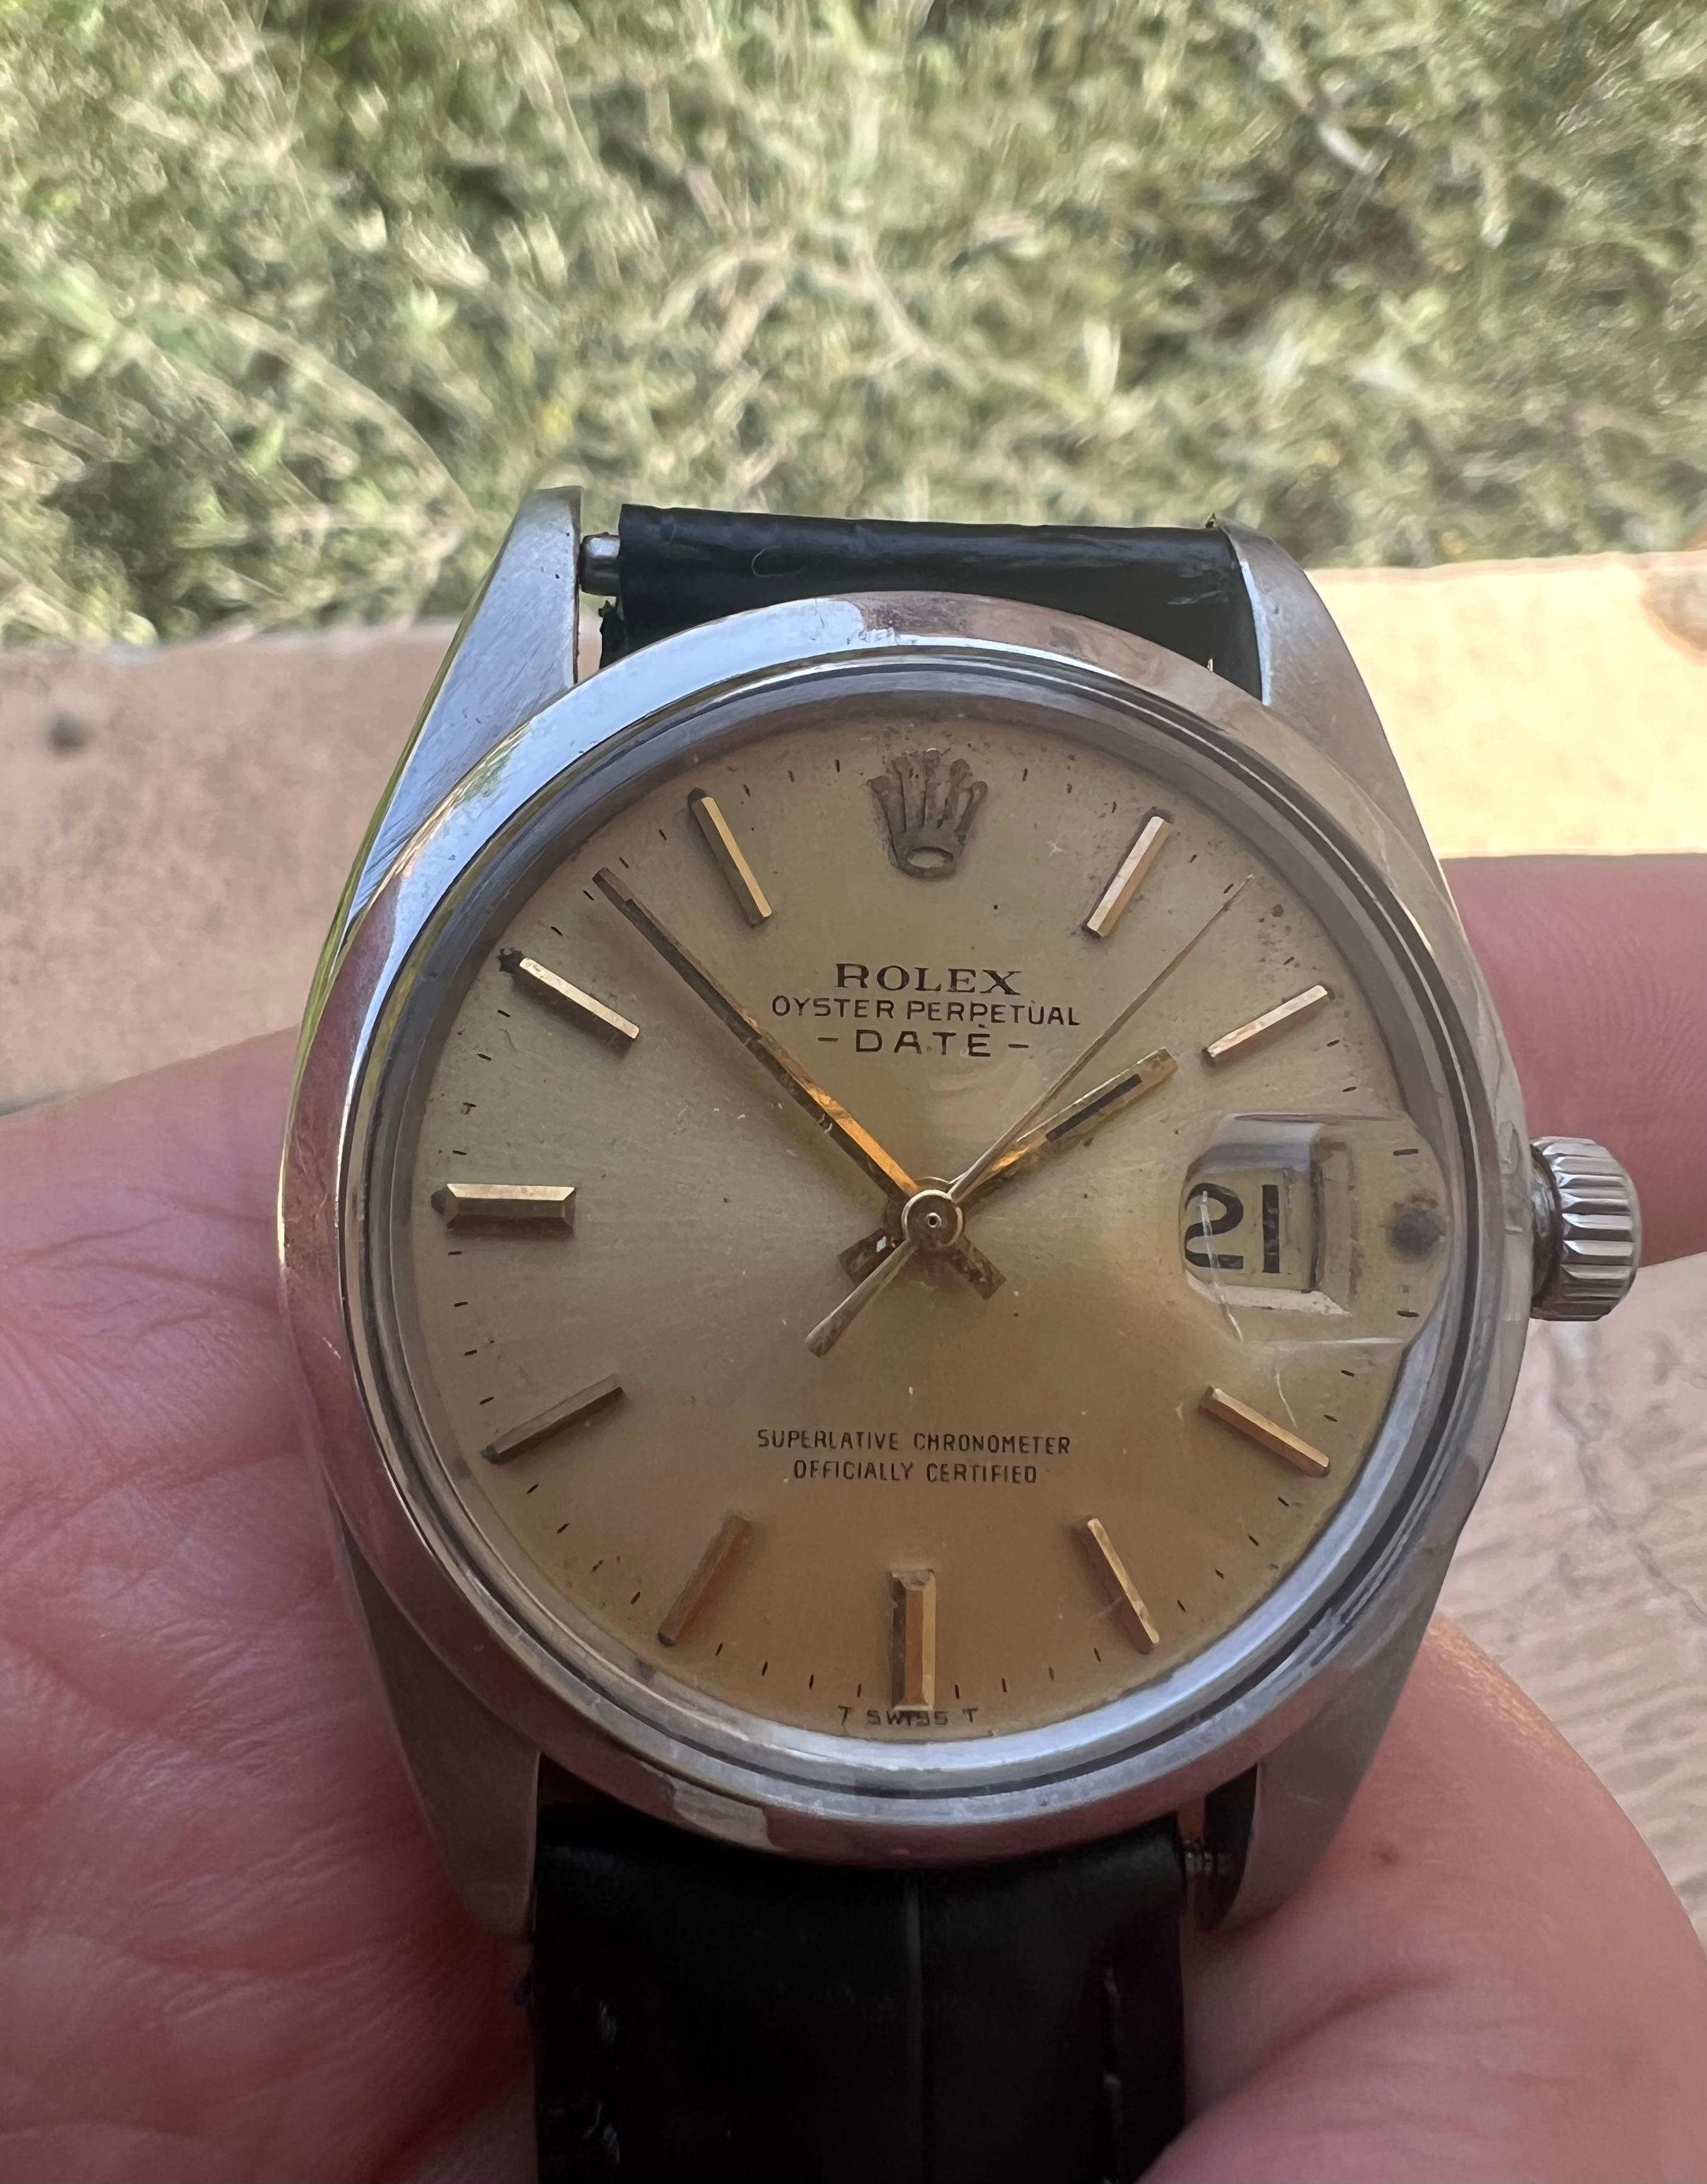 Rolex Oyster Perpetual Date 1500 Automatic Original Champagne Dial Watch In Good Condition For Sale In Toronto, CA